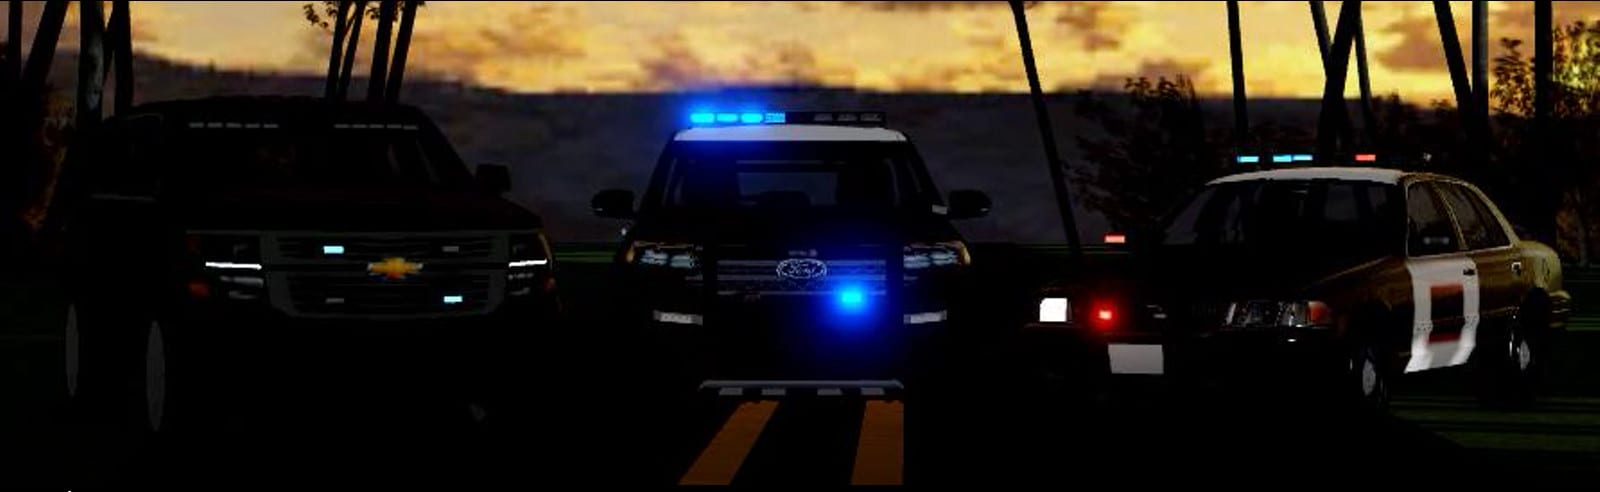 Build A Roblox Map Or Make A Cop Car For You By Sillyanimations - cop car roblox